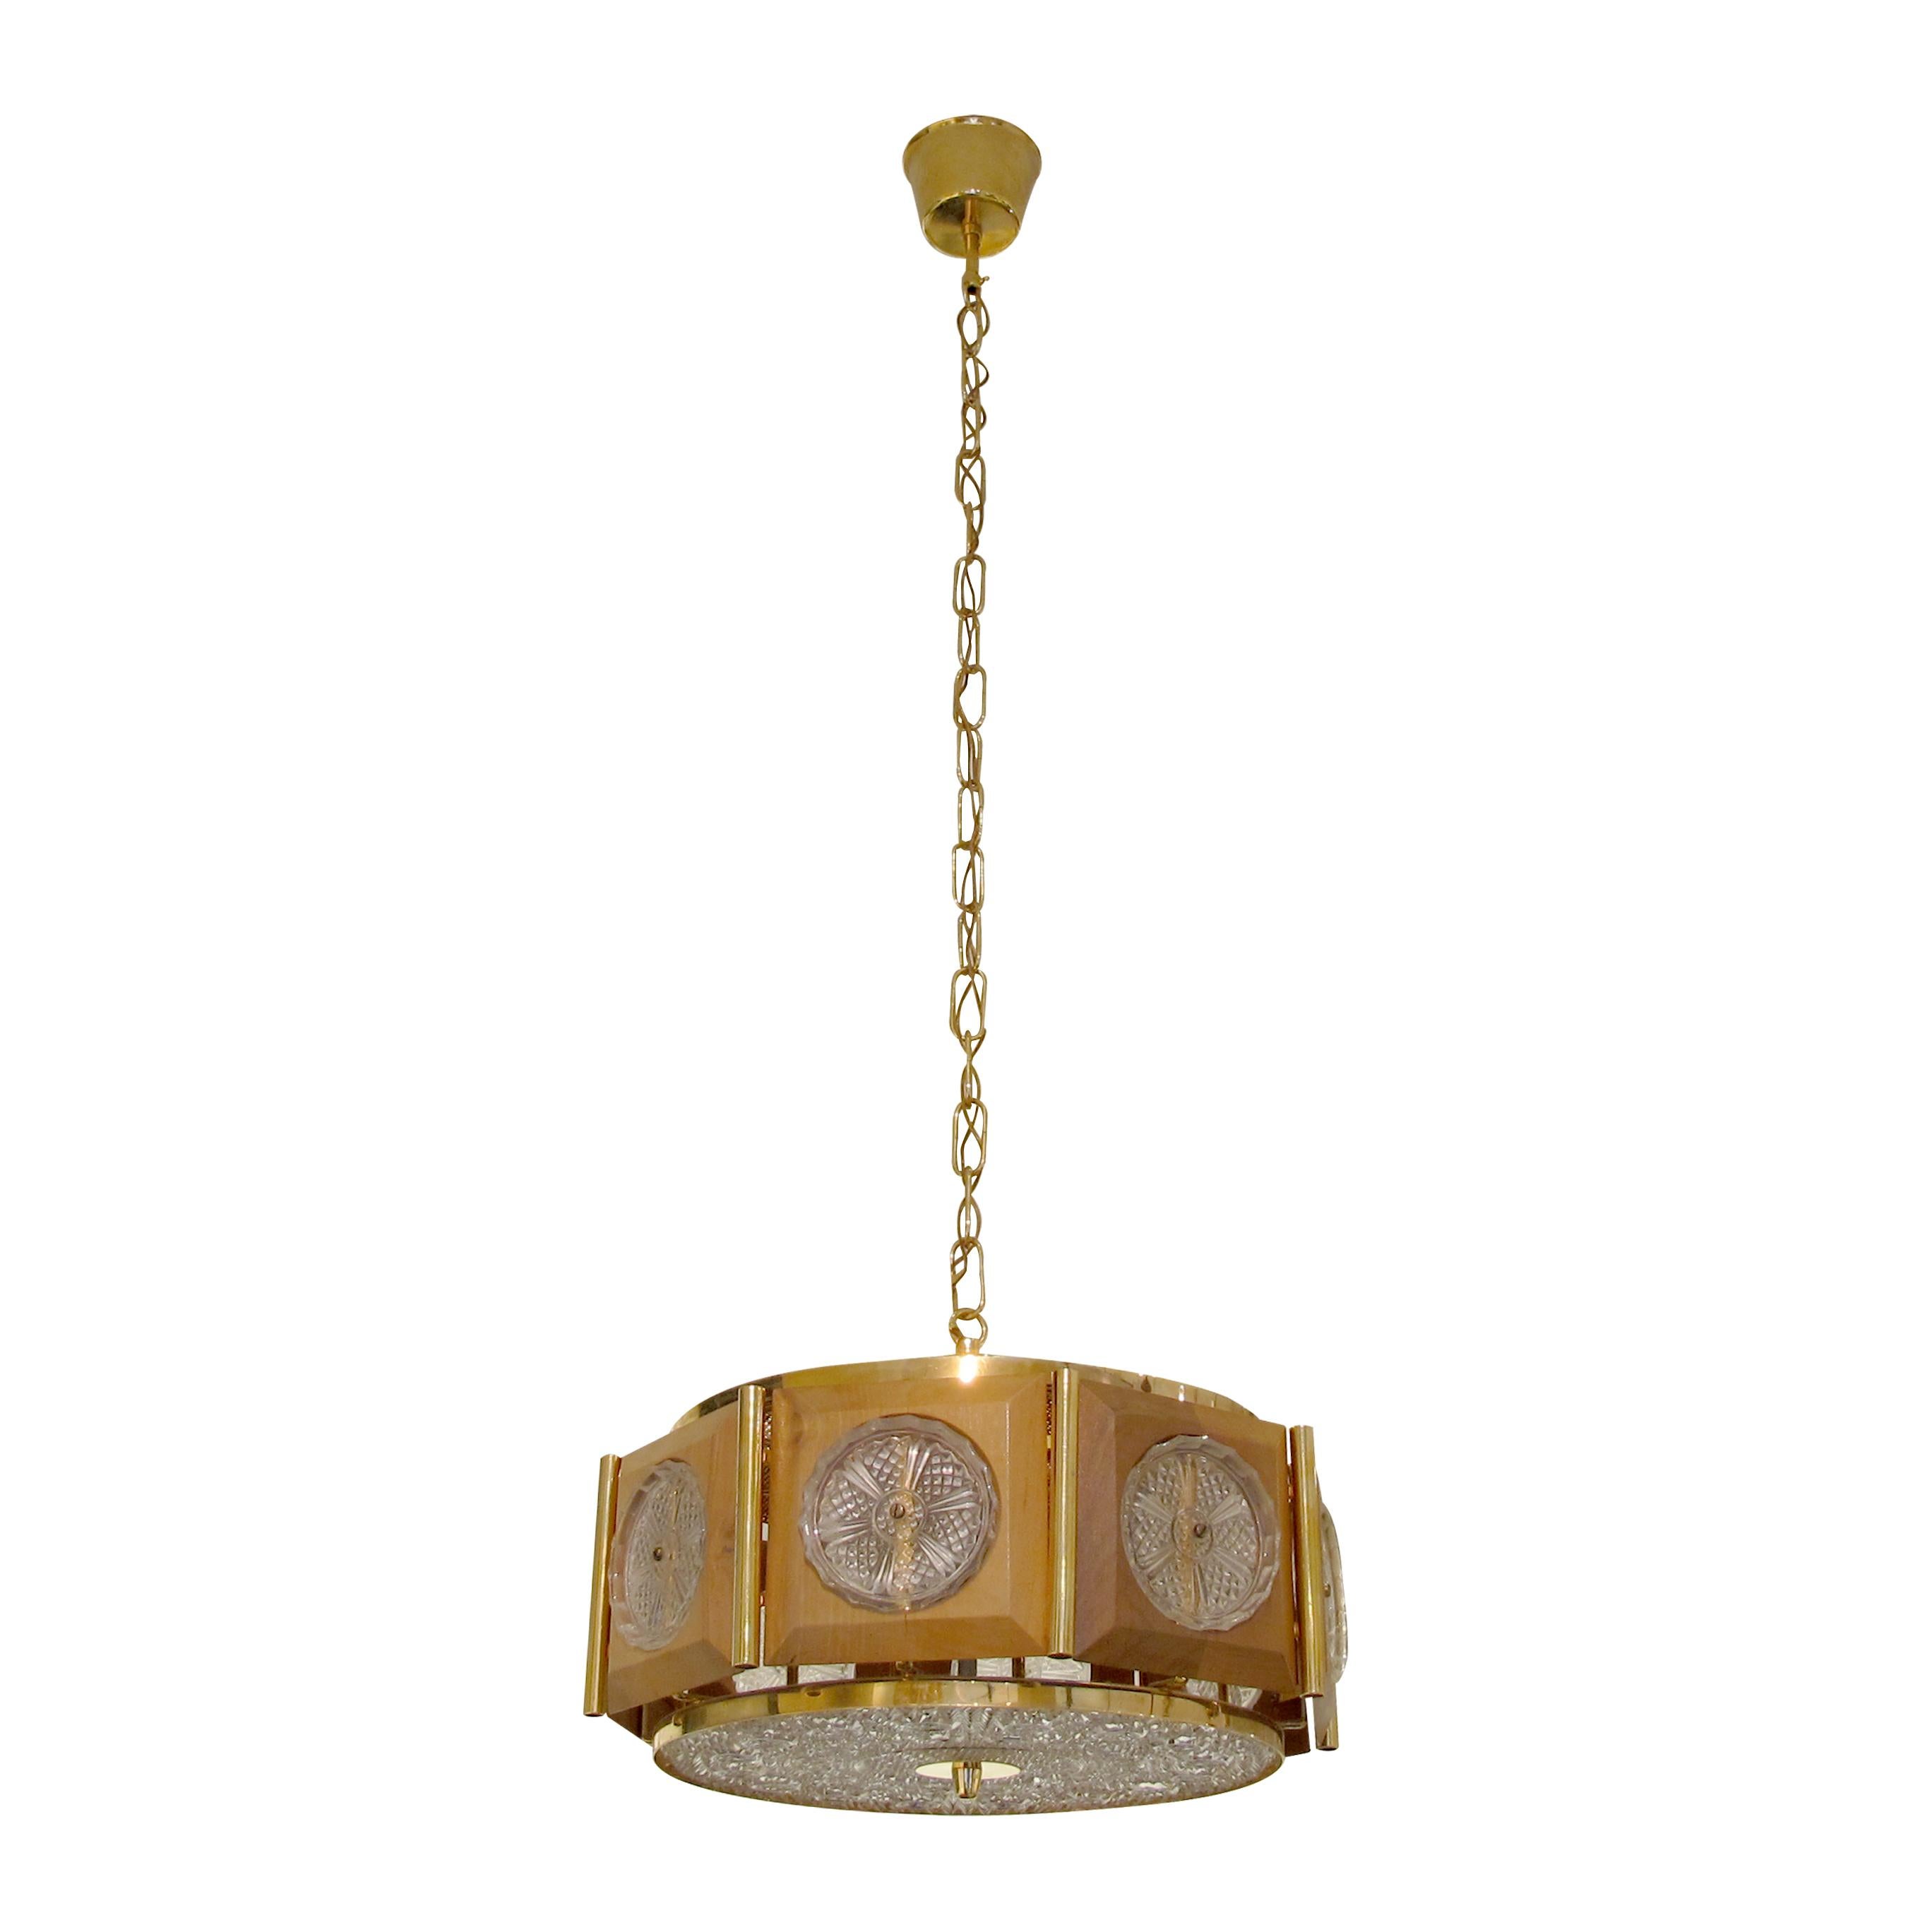 An elegant 1950s Swedish ceiling hanging light. The light is fitted with a long brass chain which is ideal for high ceilings and can be shortened to your desired height requirements. The brass frame is fitted with bevelled walnut squares with